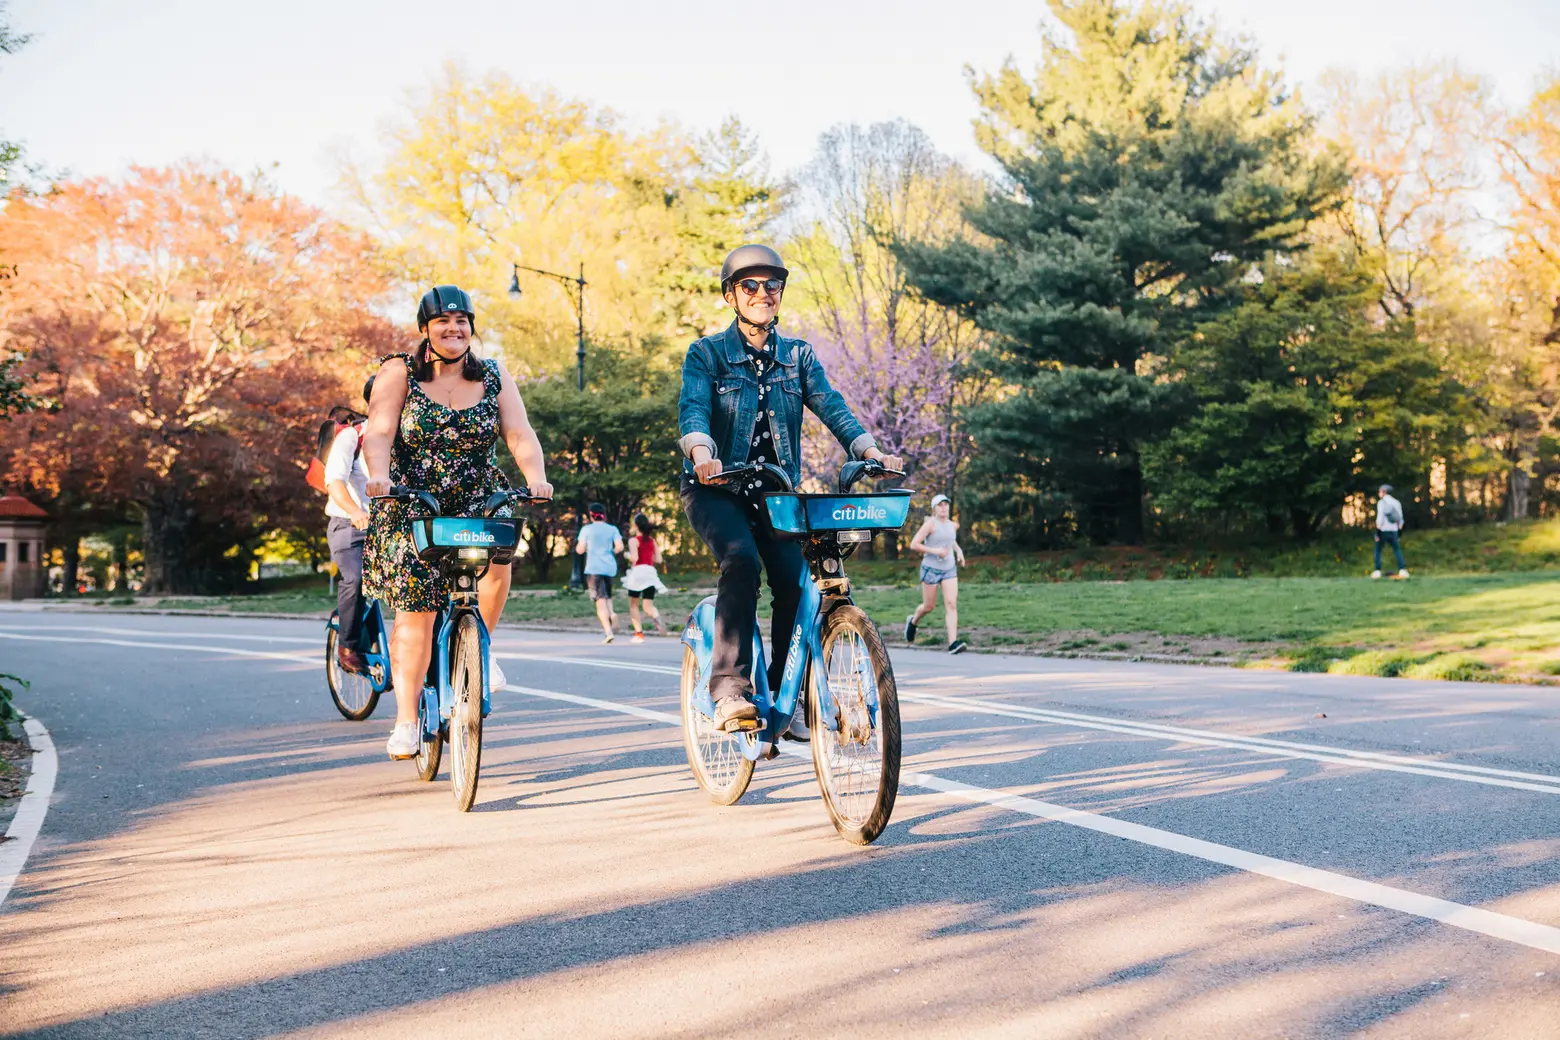 Prospect Park will host first-ever ‘bike day’ this weekend